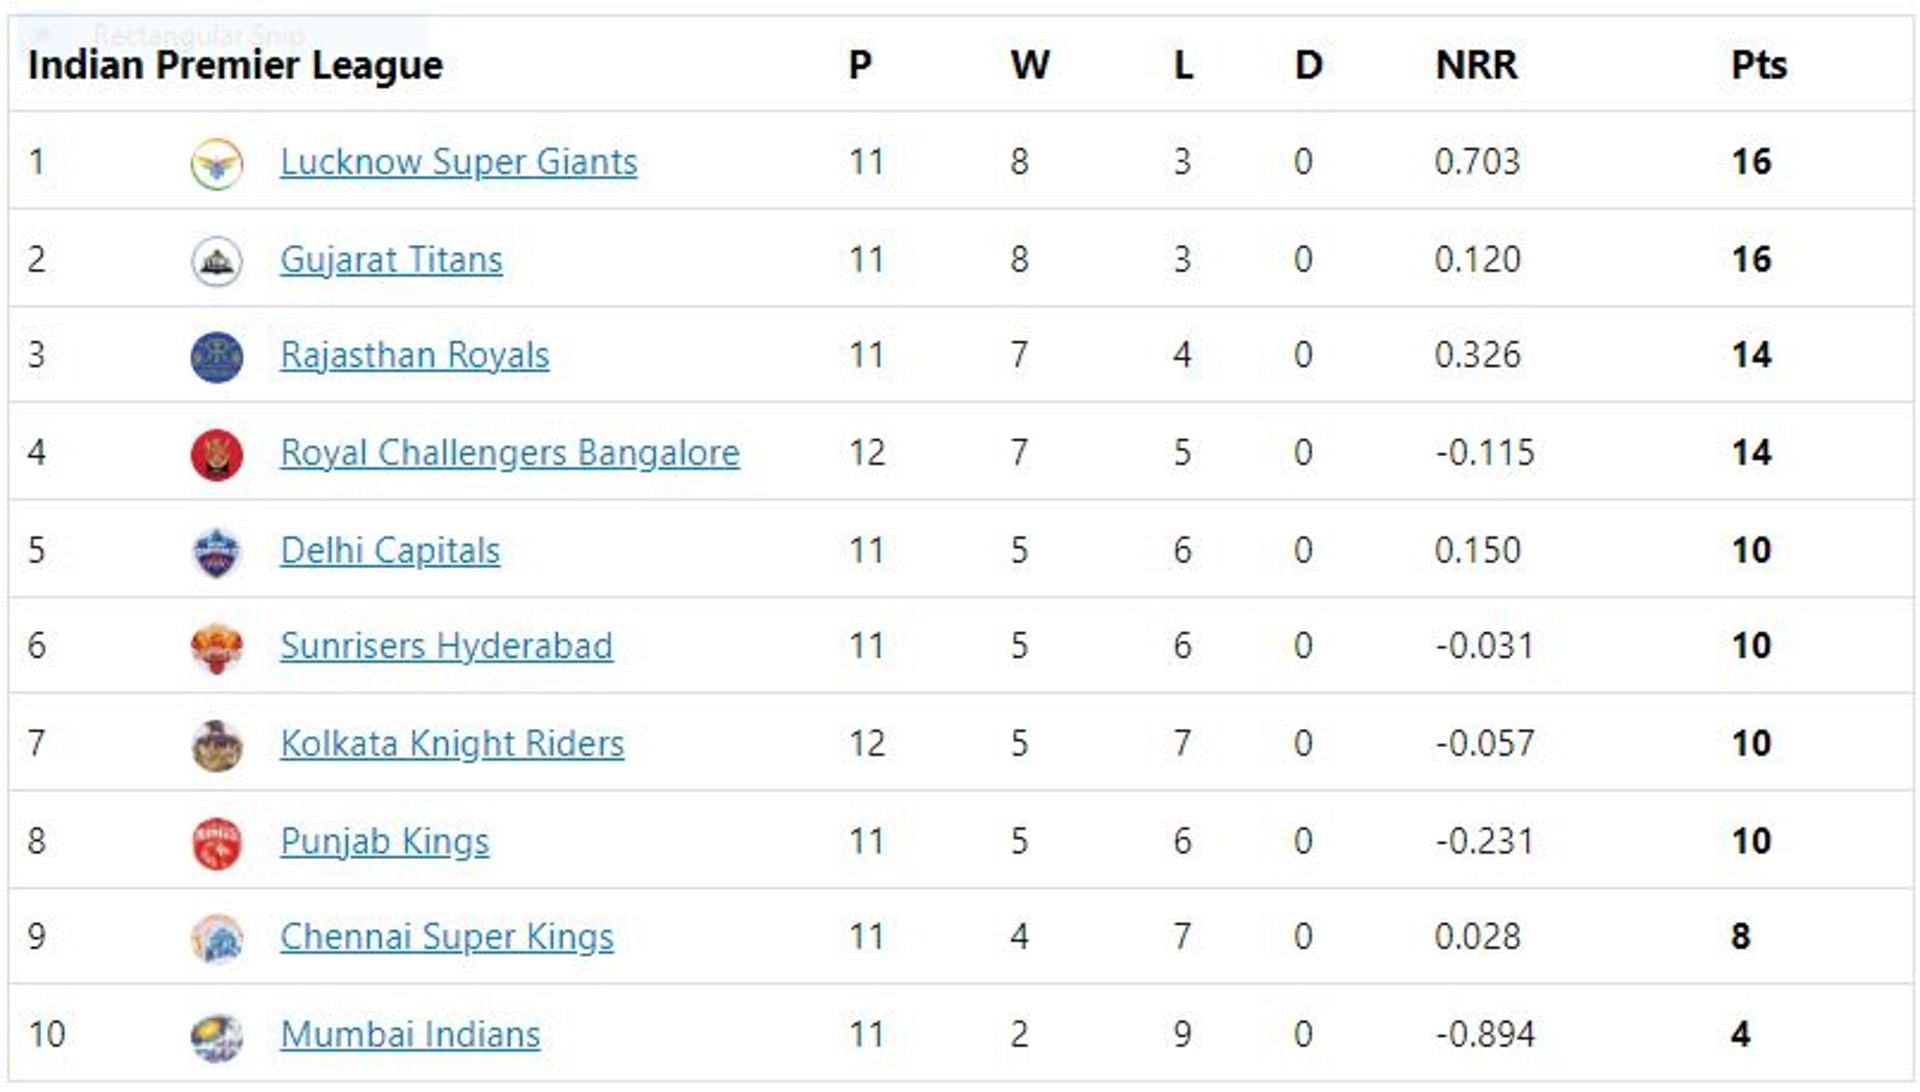 KKR climb to the seventh place after having played an extra match